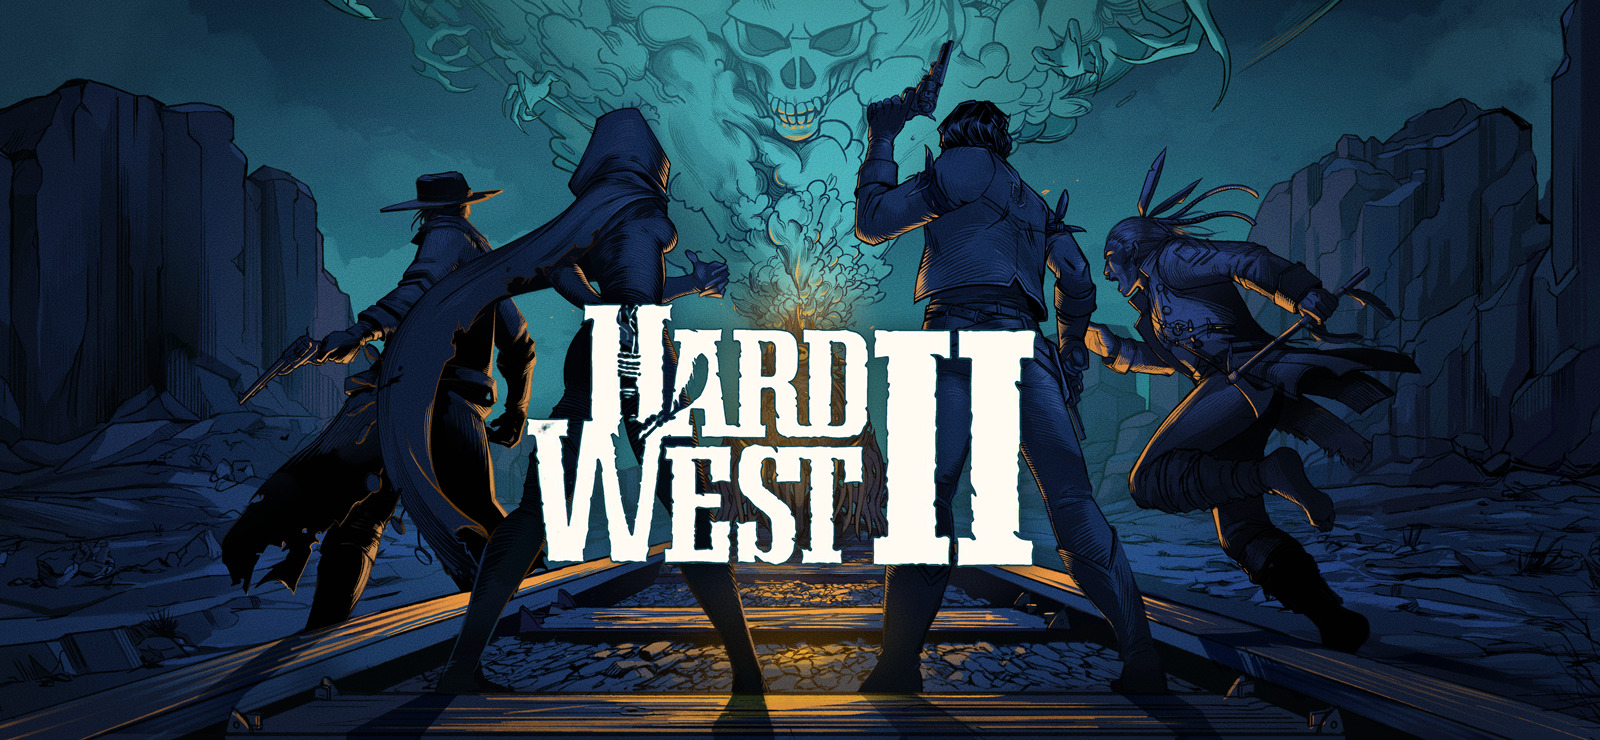 Baixe a Wild West Undead Demo hoje - Epic Games Store